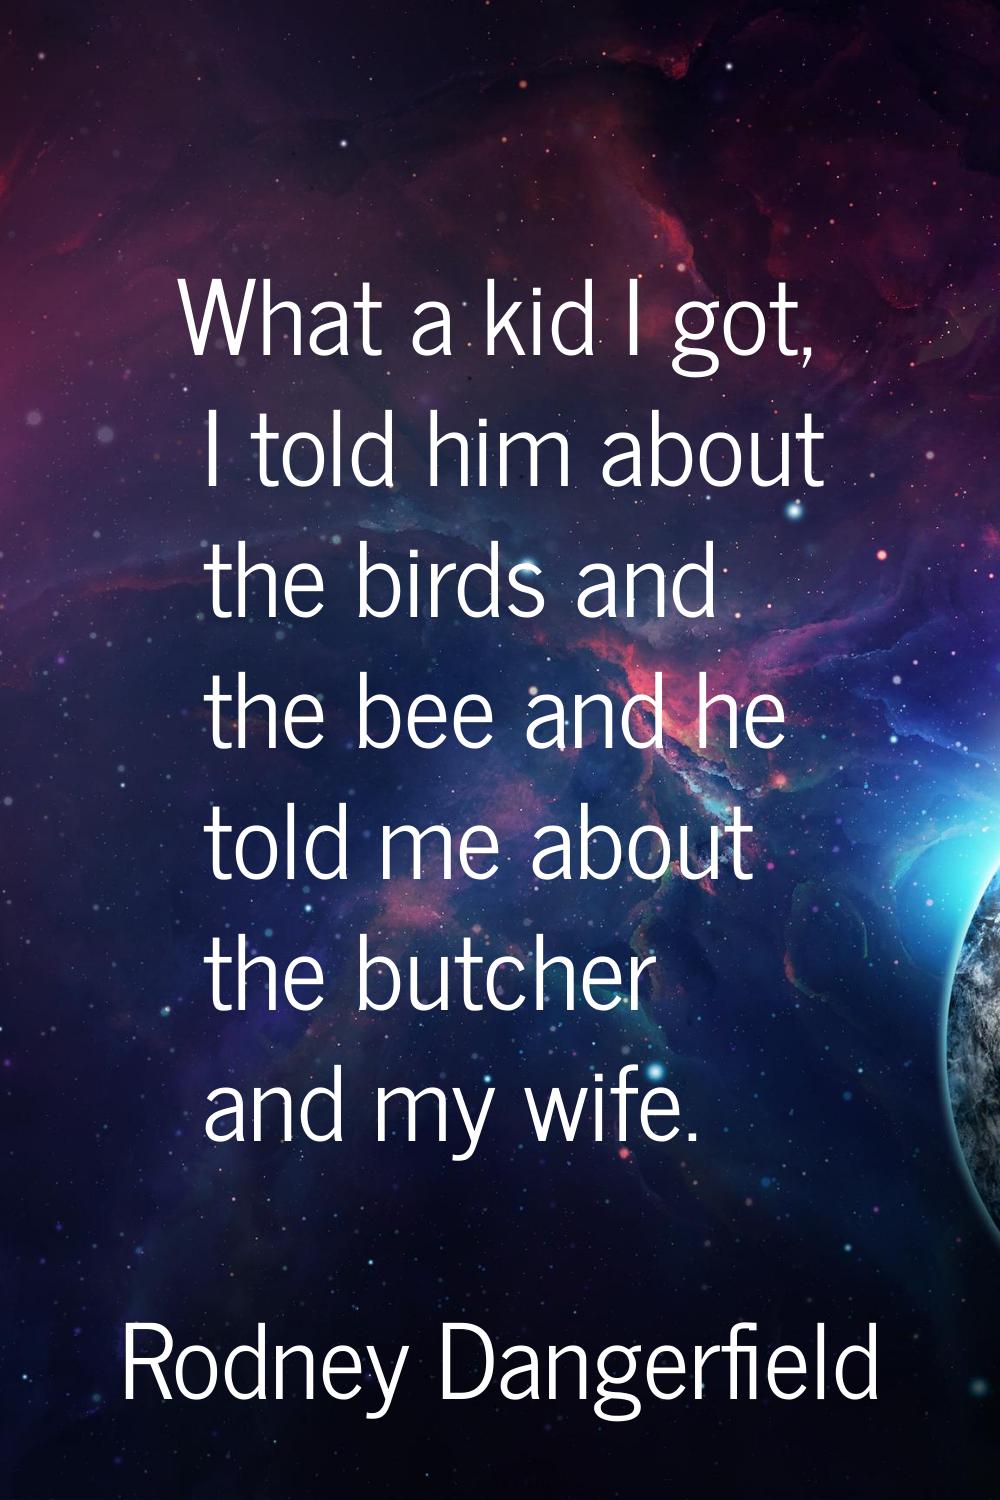 What a kid I got, I told him about the birds and the bee and he told me about the butcher and my wi